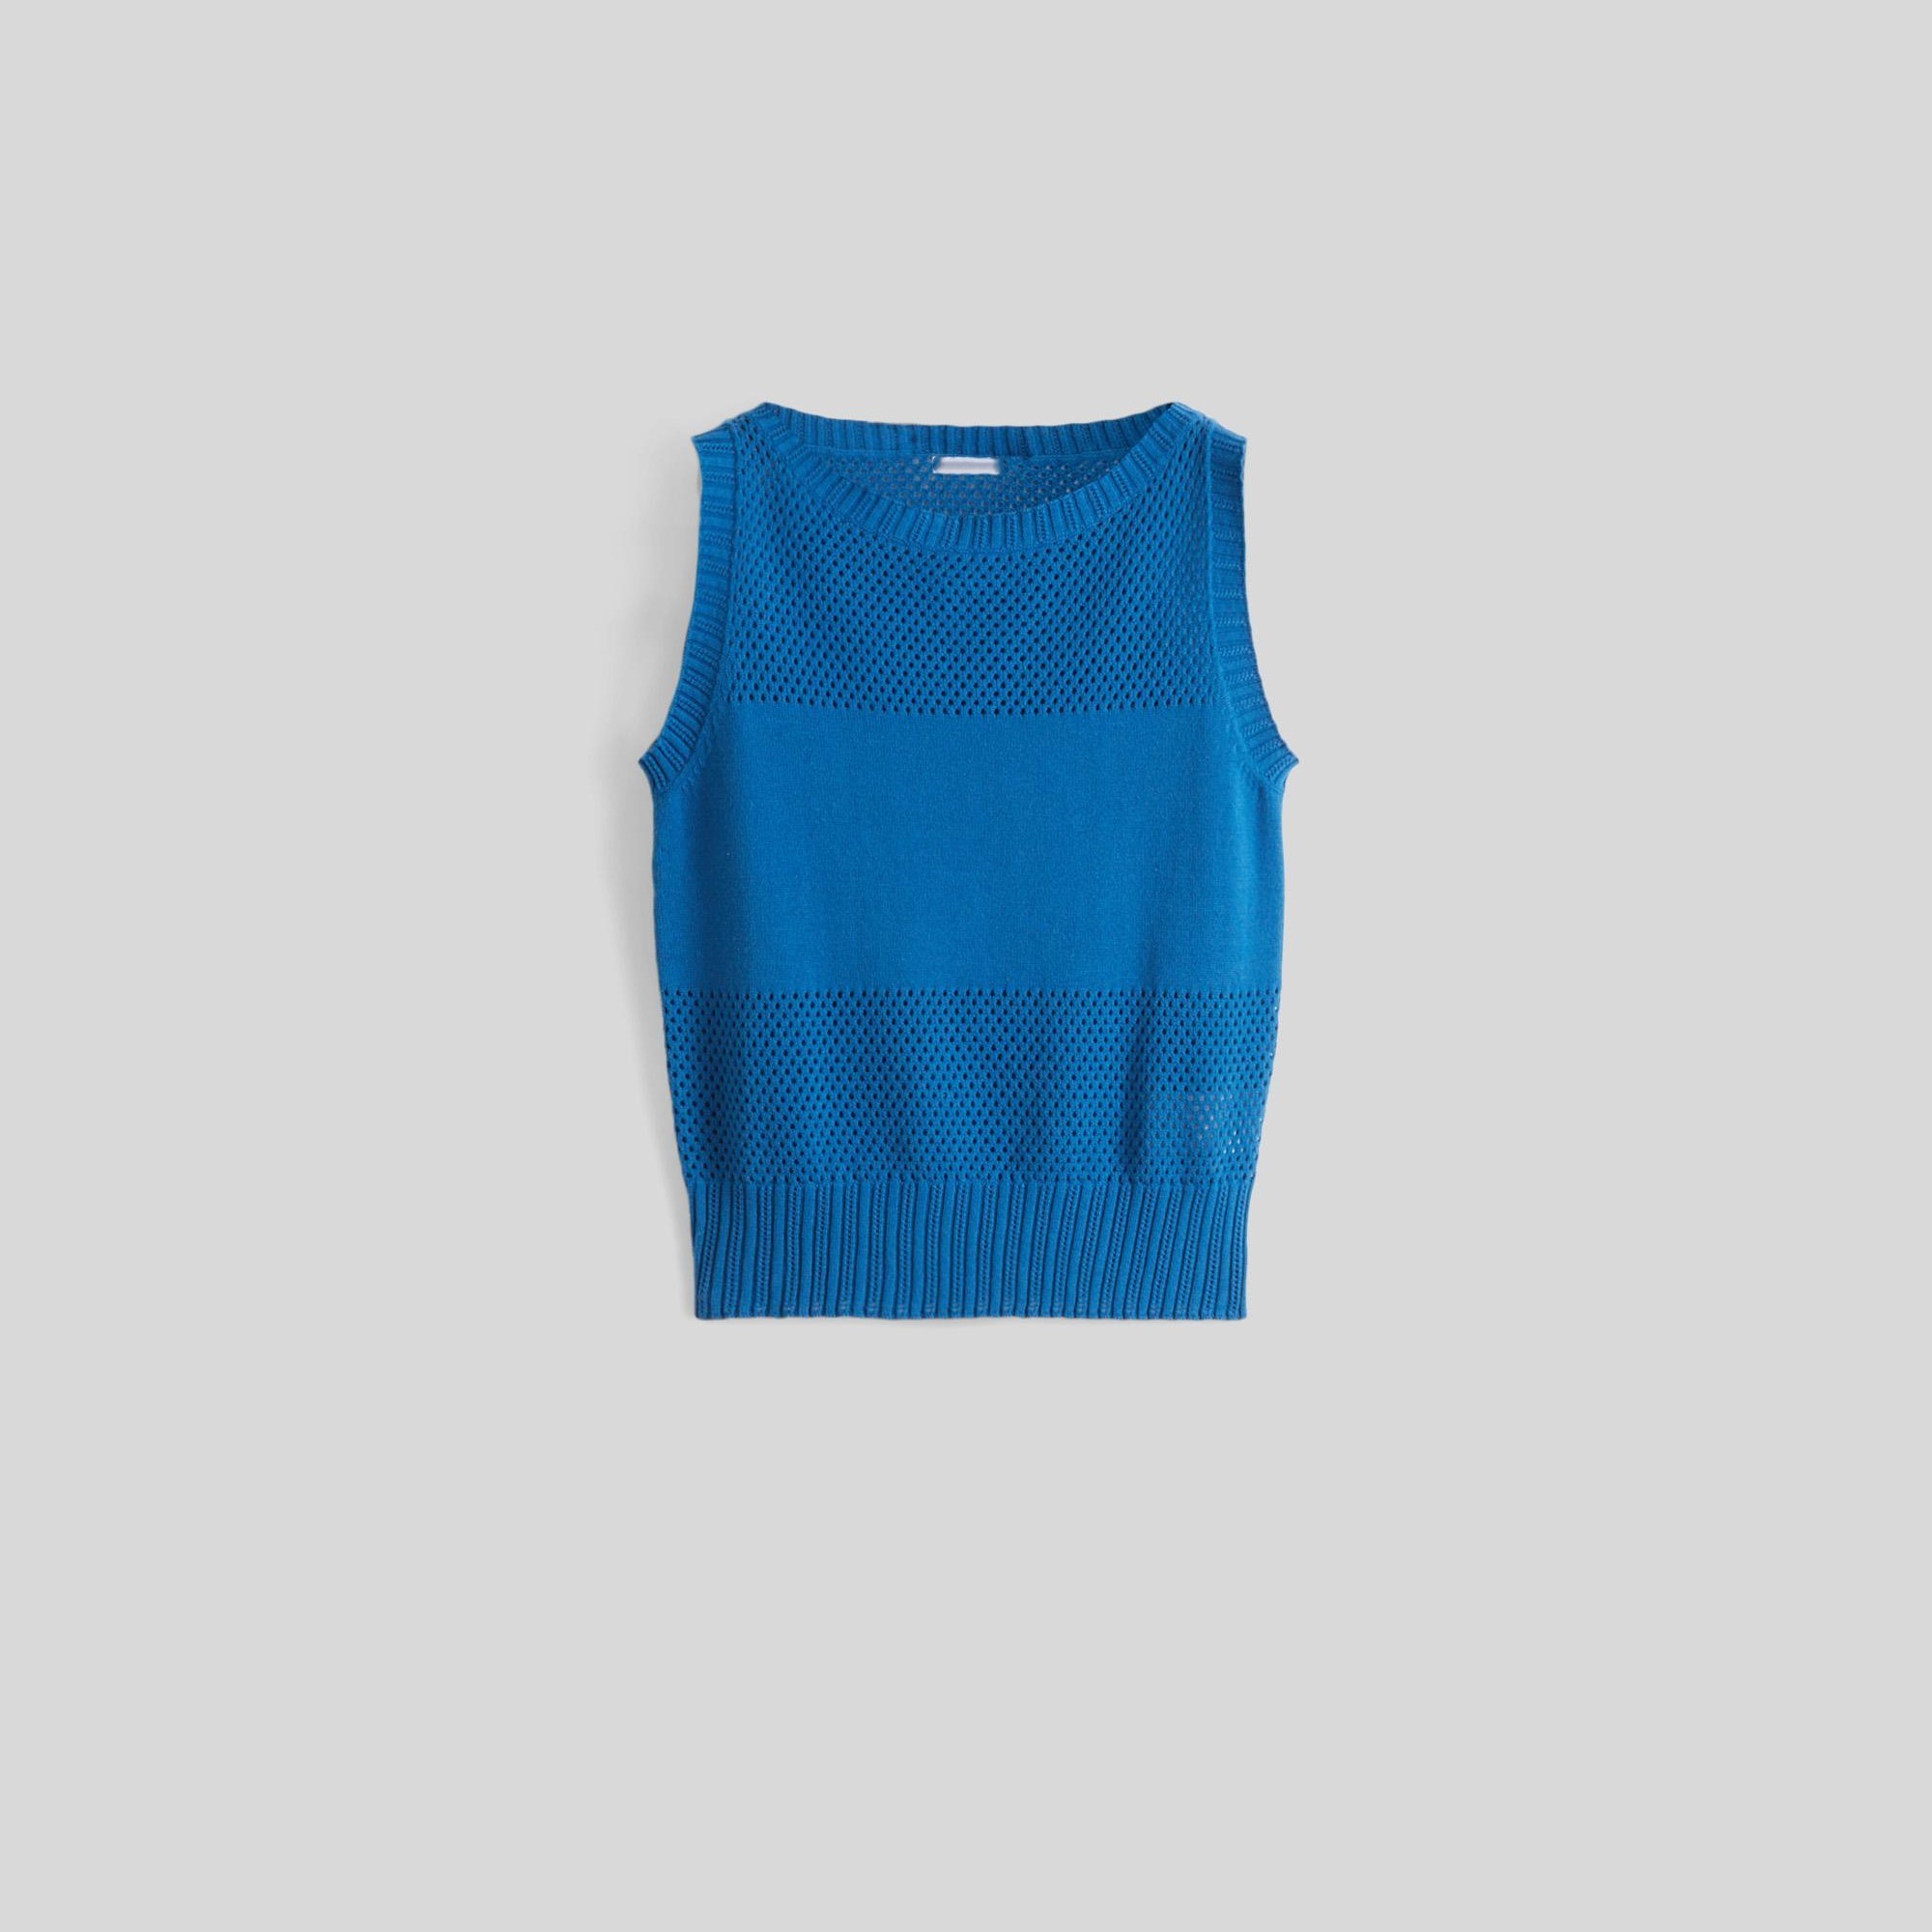 Ladies’Pure Cotton Pointelle Knitting Sleeveless Jumper for Women’s Top Knitwear Vest